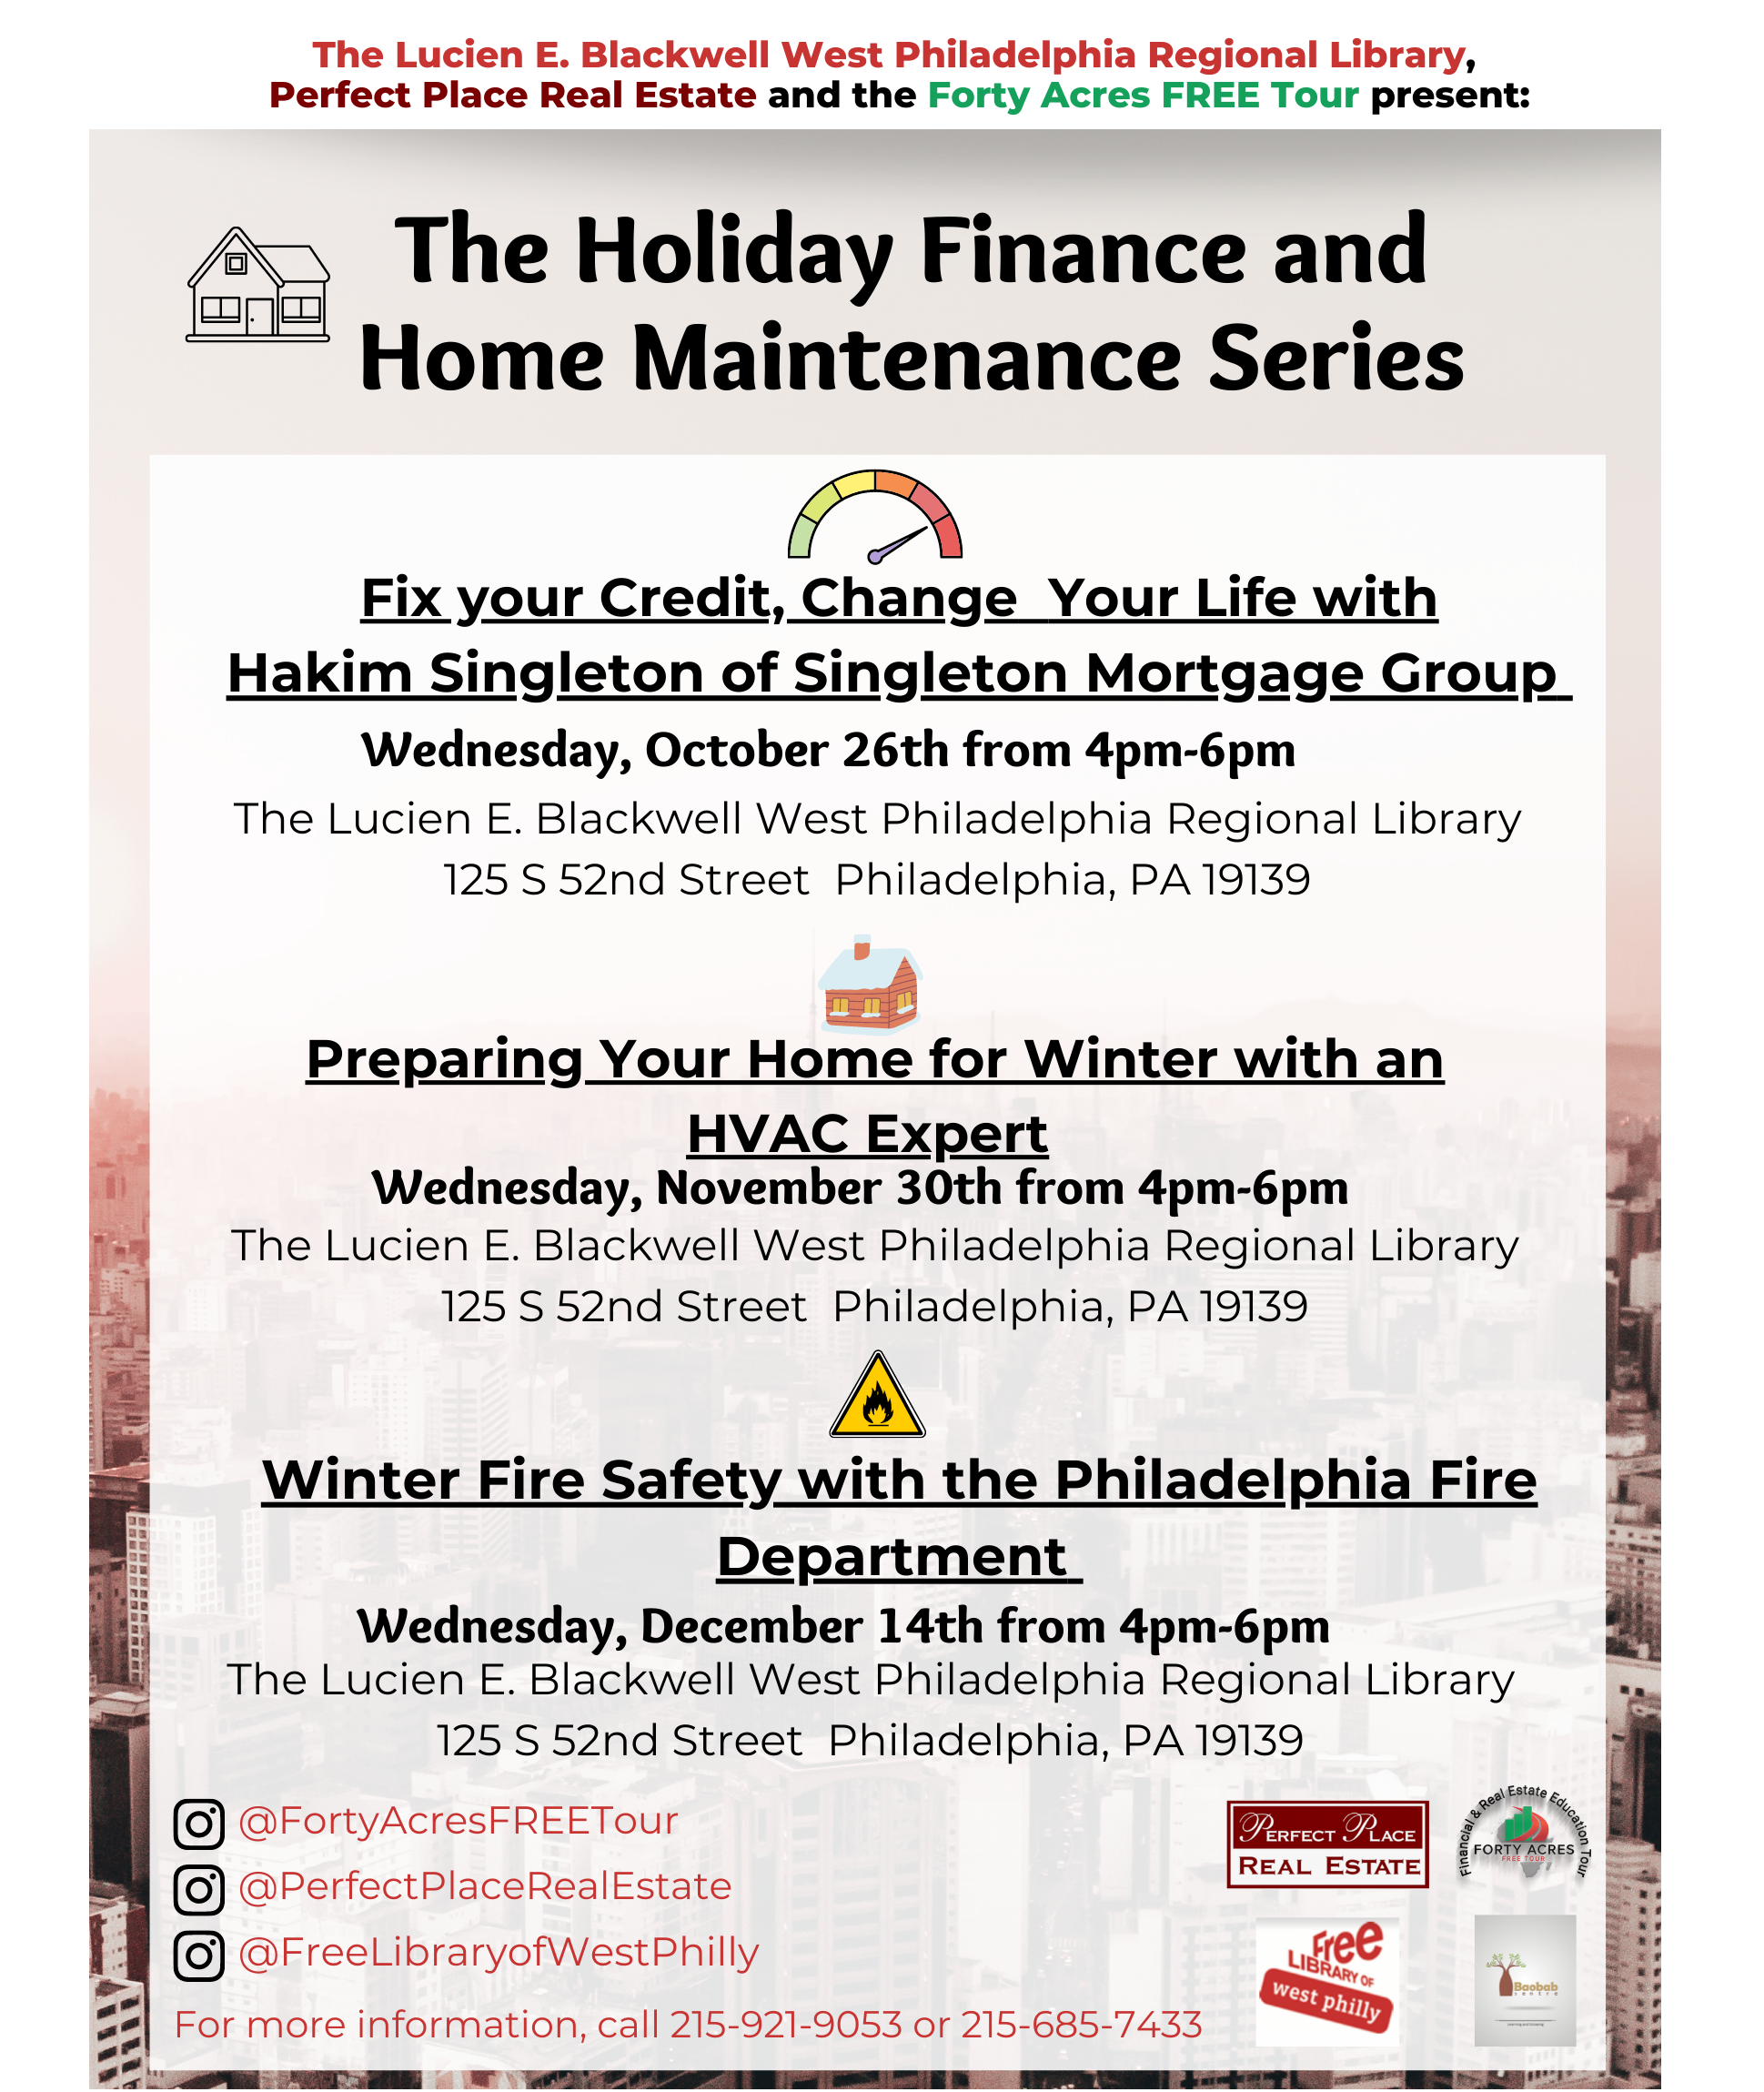 1191_1085493_The Holiday Finance and Home Maintenance Series Flyer.png